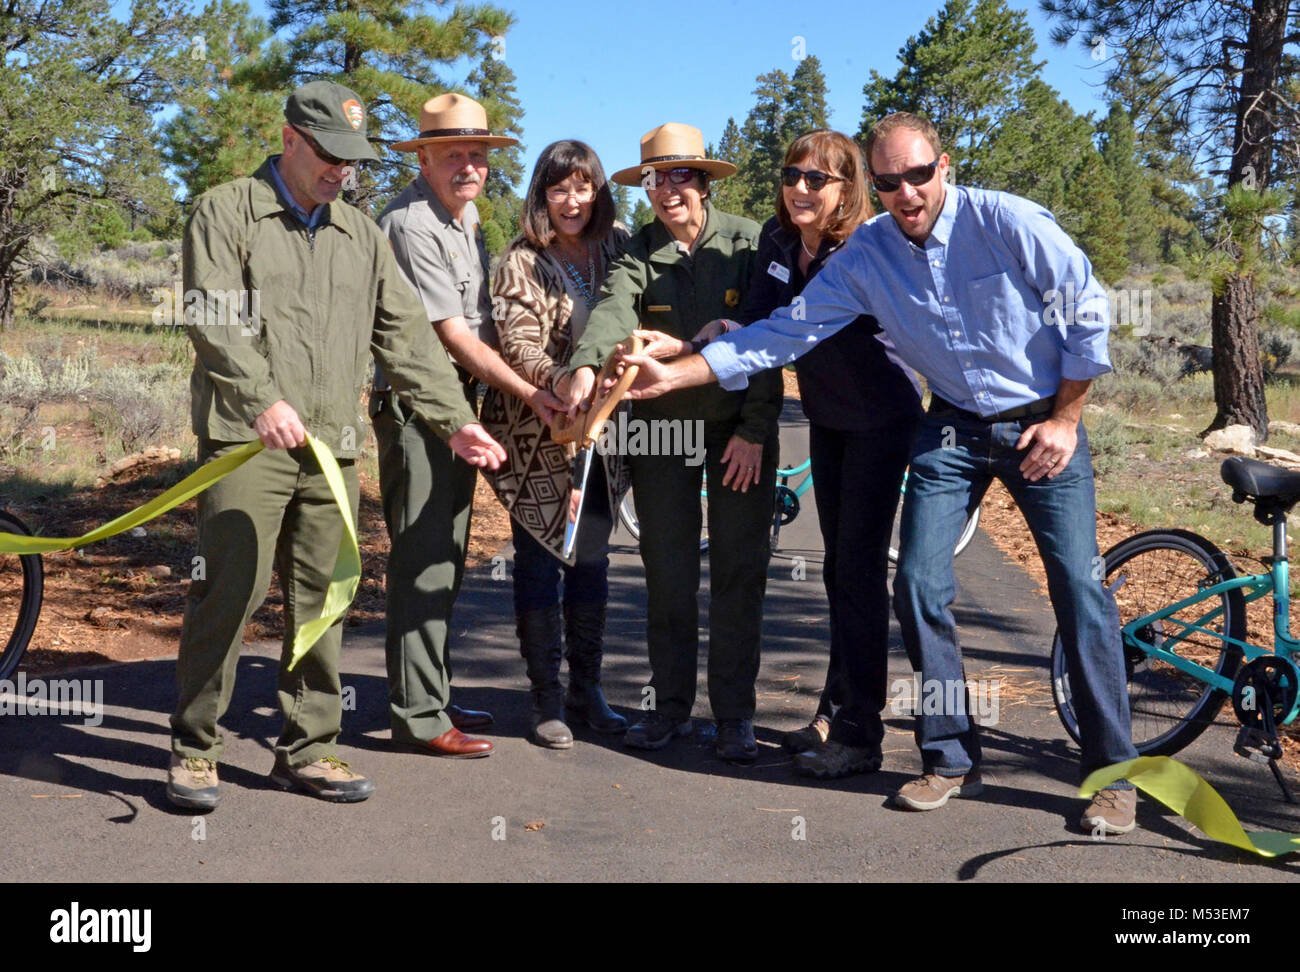 Ribbon Cutting - Tusayan Greenway Trail Completion . Left to Right: Bill Allen - NPS Trails Supervisor, Don Curnutt - NPS Chief of Facilities Management, Becky Wirth - Vice Mayor of Tusayan, Diane Chalfant - Deputy Superintendent, Grand Canyon National Park, Theresa McMullan - GCA Chief Operating Officer, Wes Neal - Bright Angel Bicycles.  Bike Your Park Day (September 24, 2016) Dedication, Ribbon Cutting and inaugural ride of newly paved Tusayan t Stock Photo